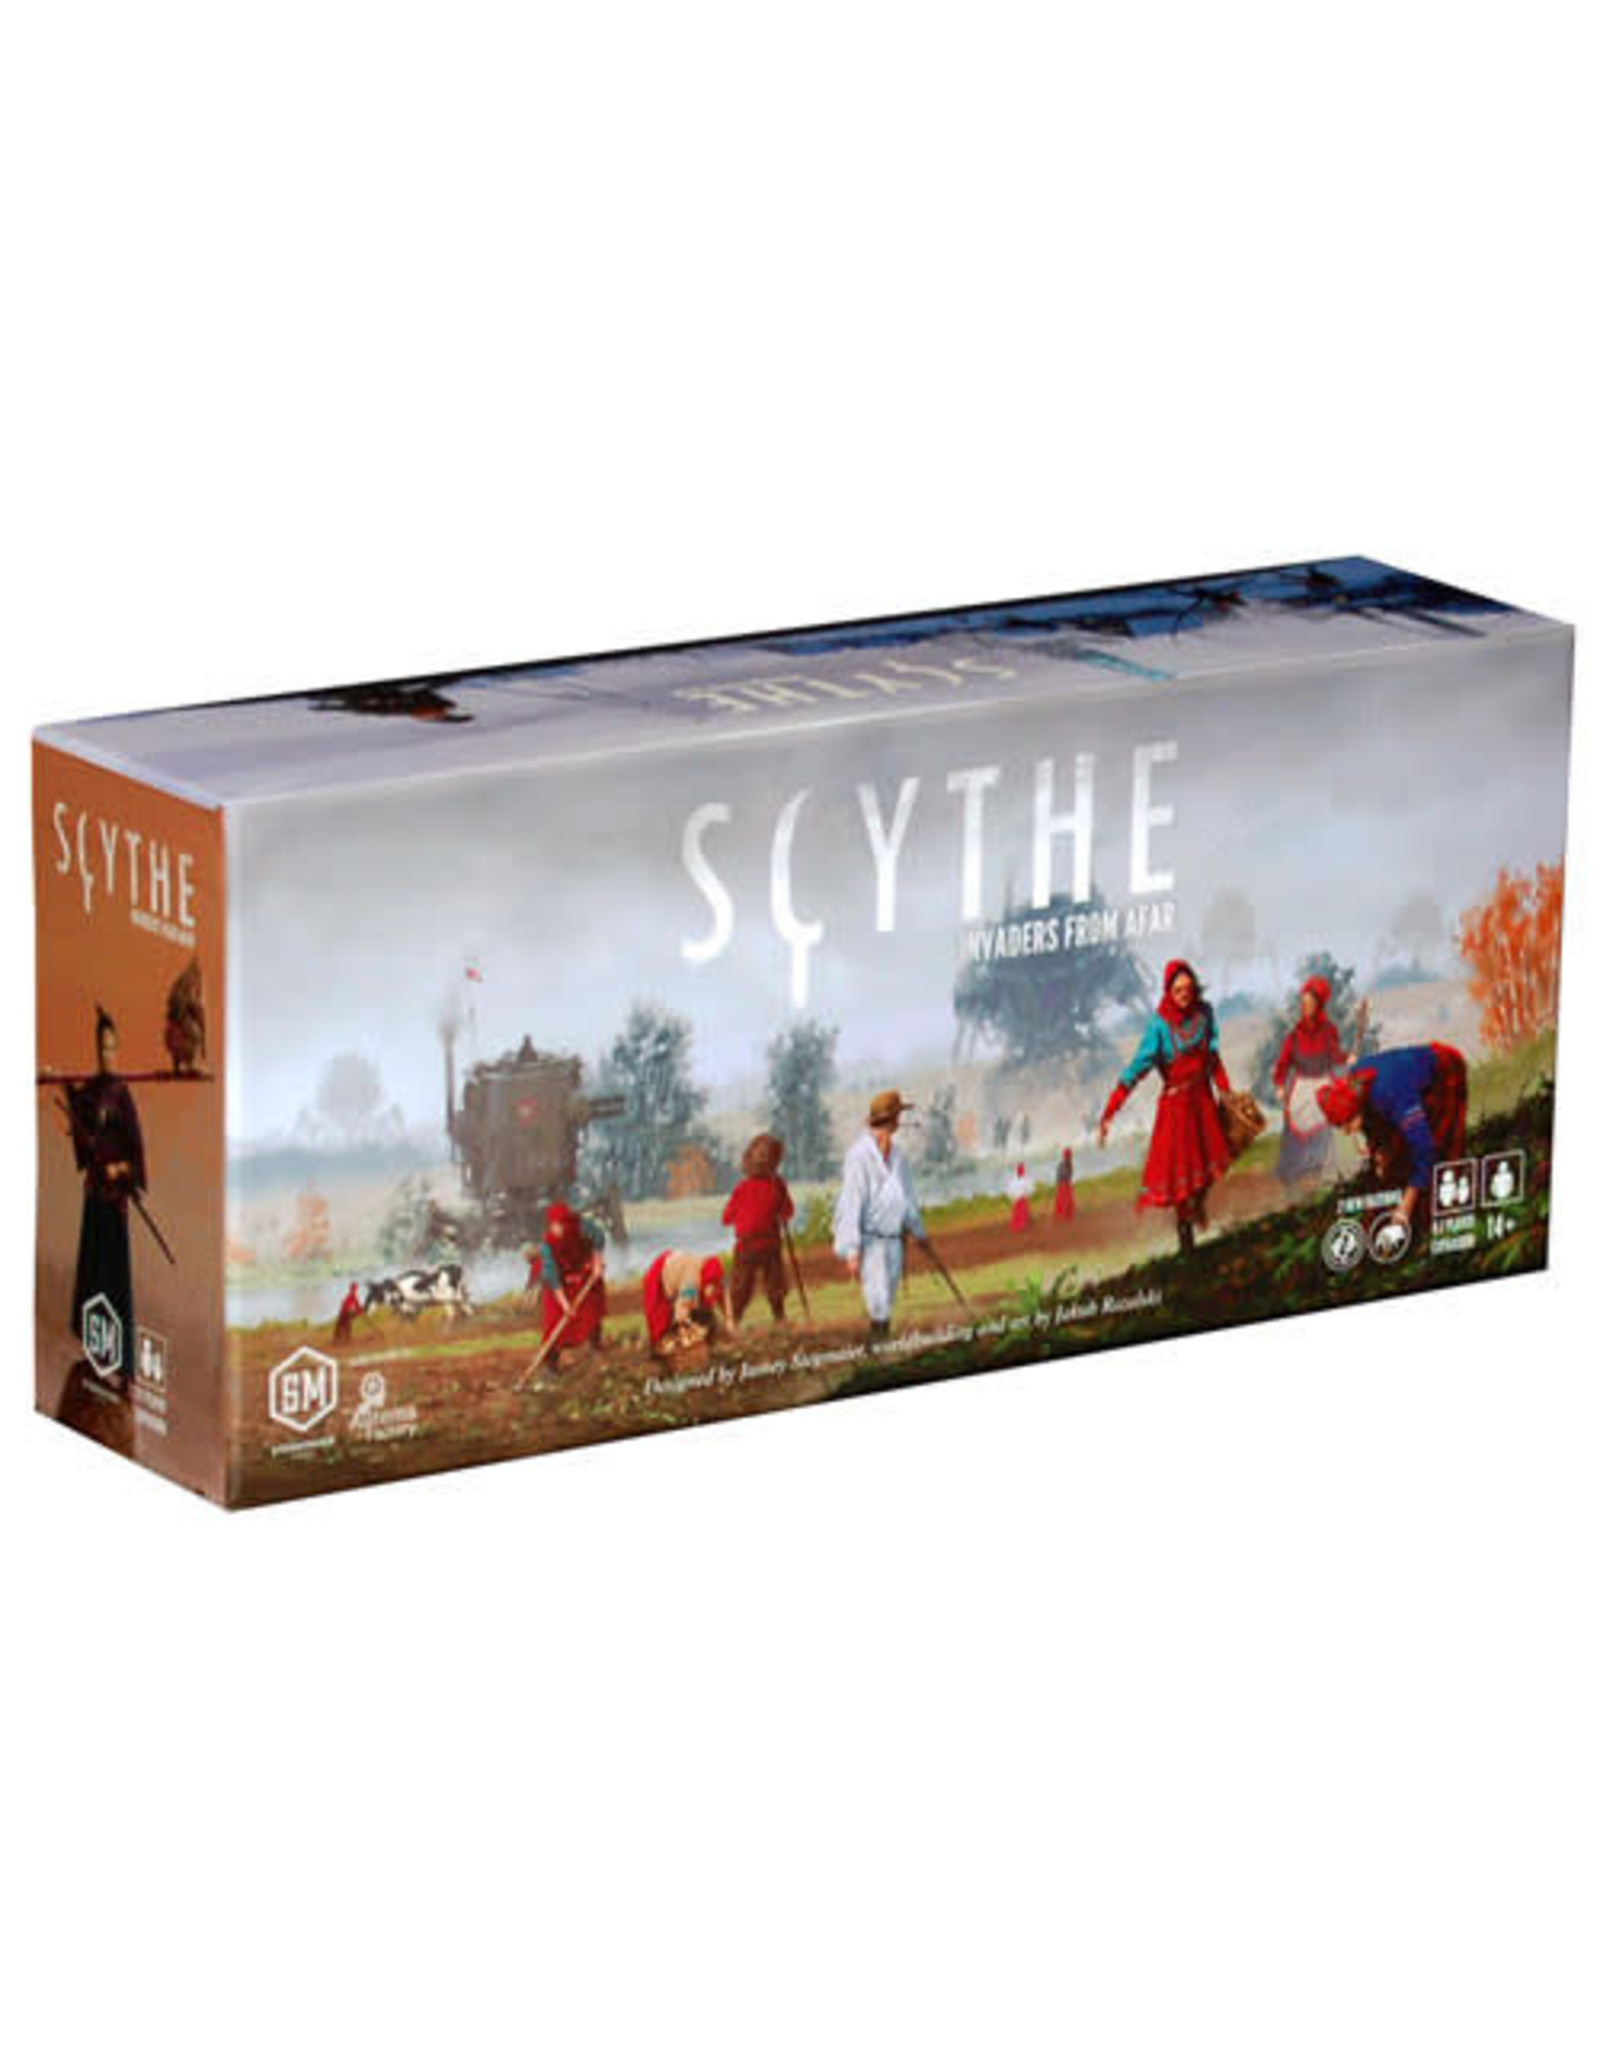 Stonemaier Games Scythe - Invaders from Afar Expansion